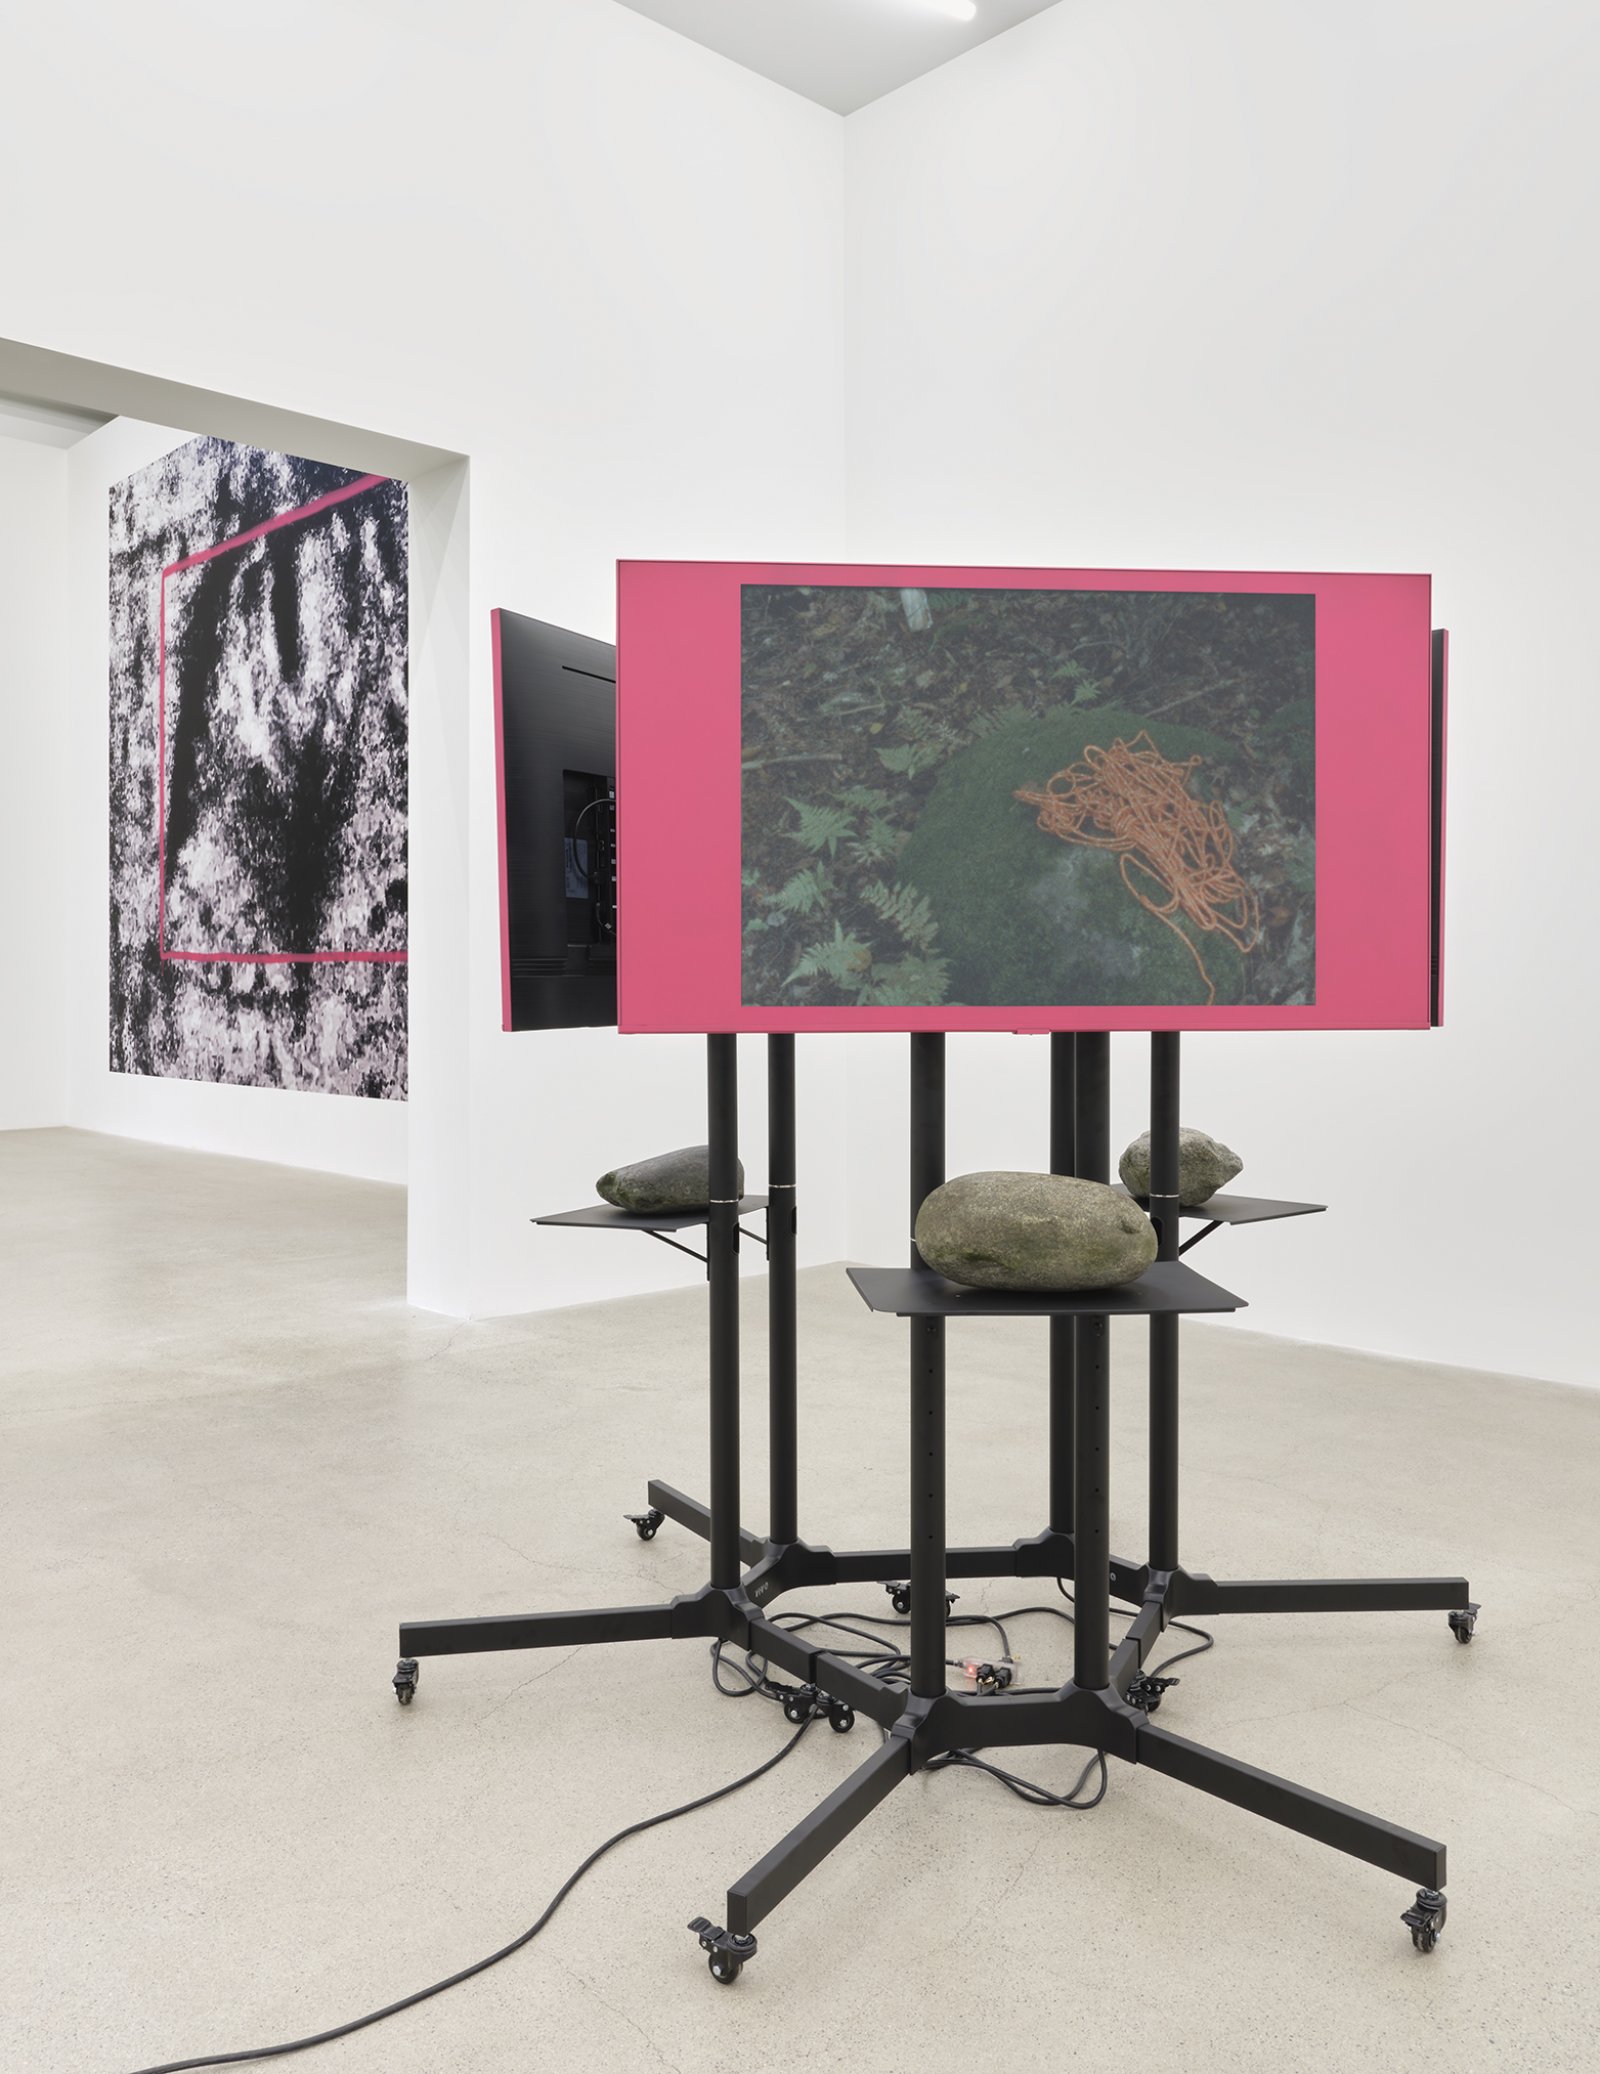 Duane Linklater, primaryuse, 2020, lcd screens, television stands, media players, spray paint, stones, 3 super 8mm film transfers to 2k video with audio, score by eagles with eyes closed, looping: 5 minutes, 19 seconds; 5 minutes, 10 seconds; 5 minutes, 23 seconds; 69 x 72 x 72 in. (175 x 183 x 183 cm)